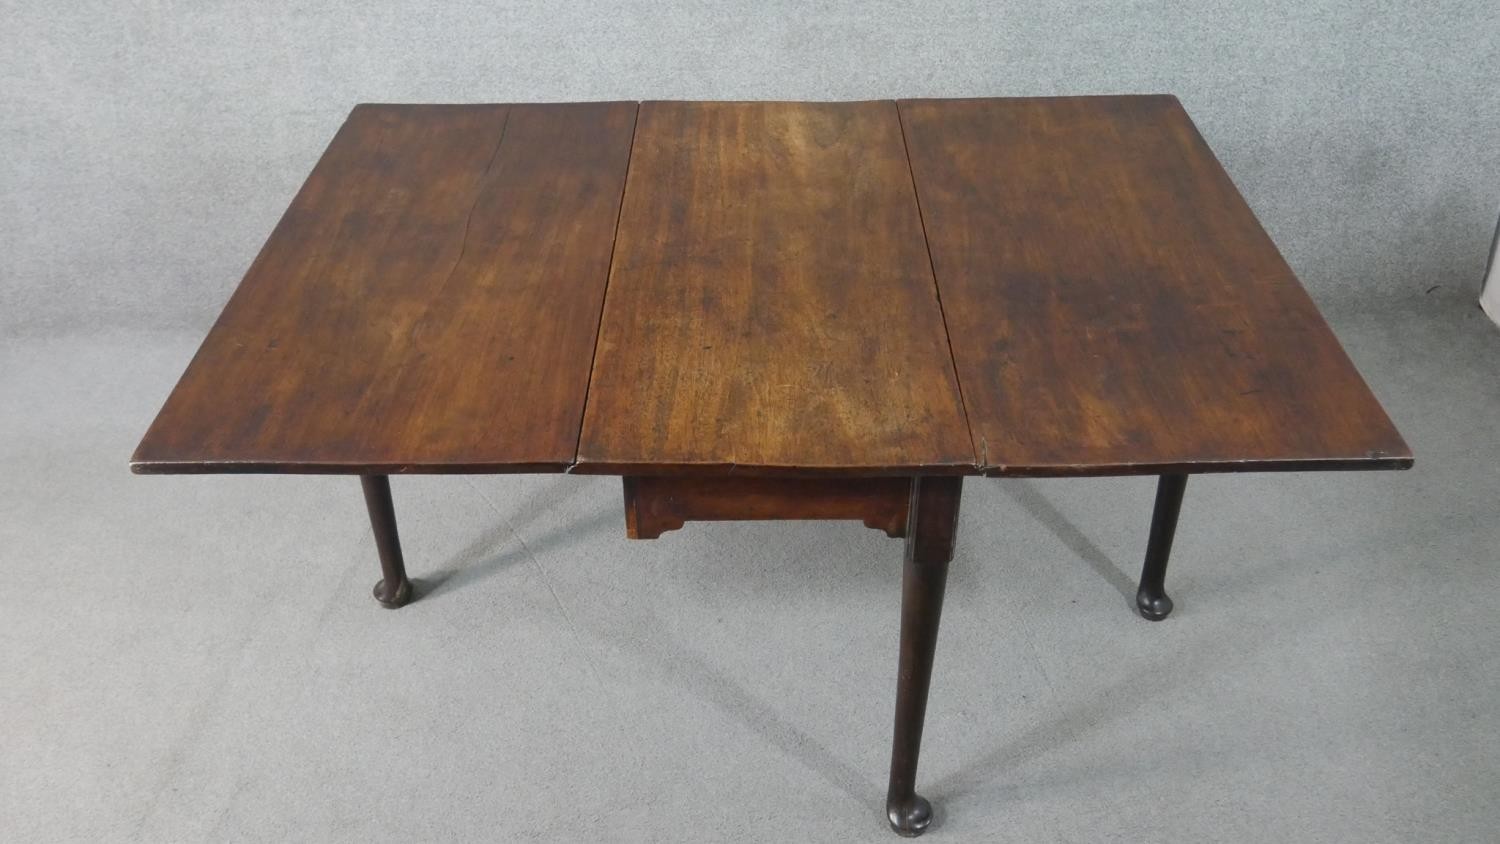 A mid 18th century mahogany drop leaf dining table, with a rectangular top, the legs with pad - Image 4 of 7